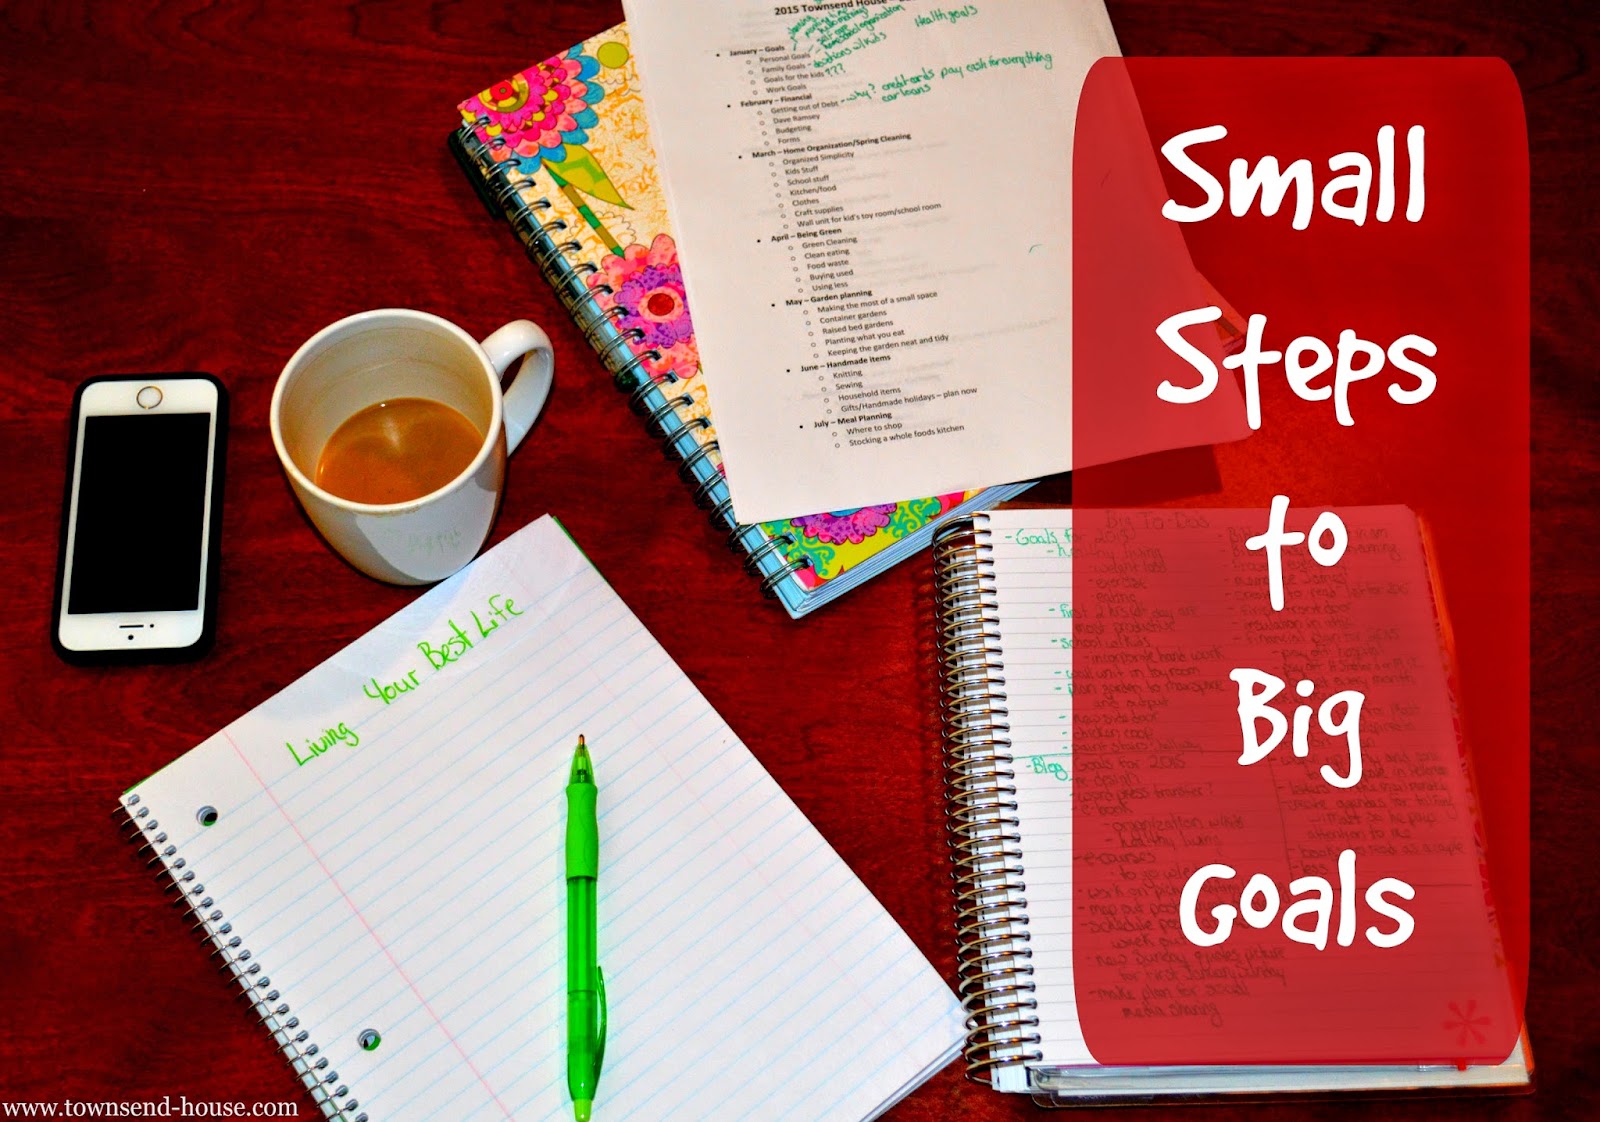 Small Steps to Big Goals